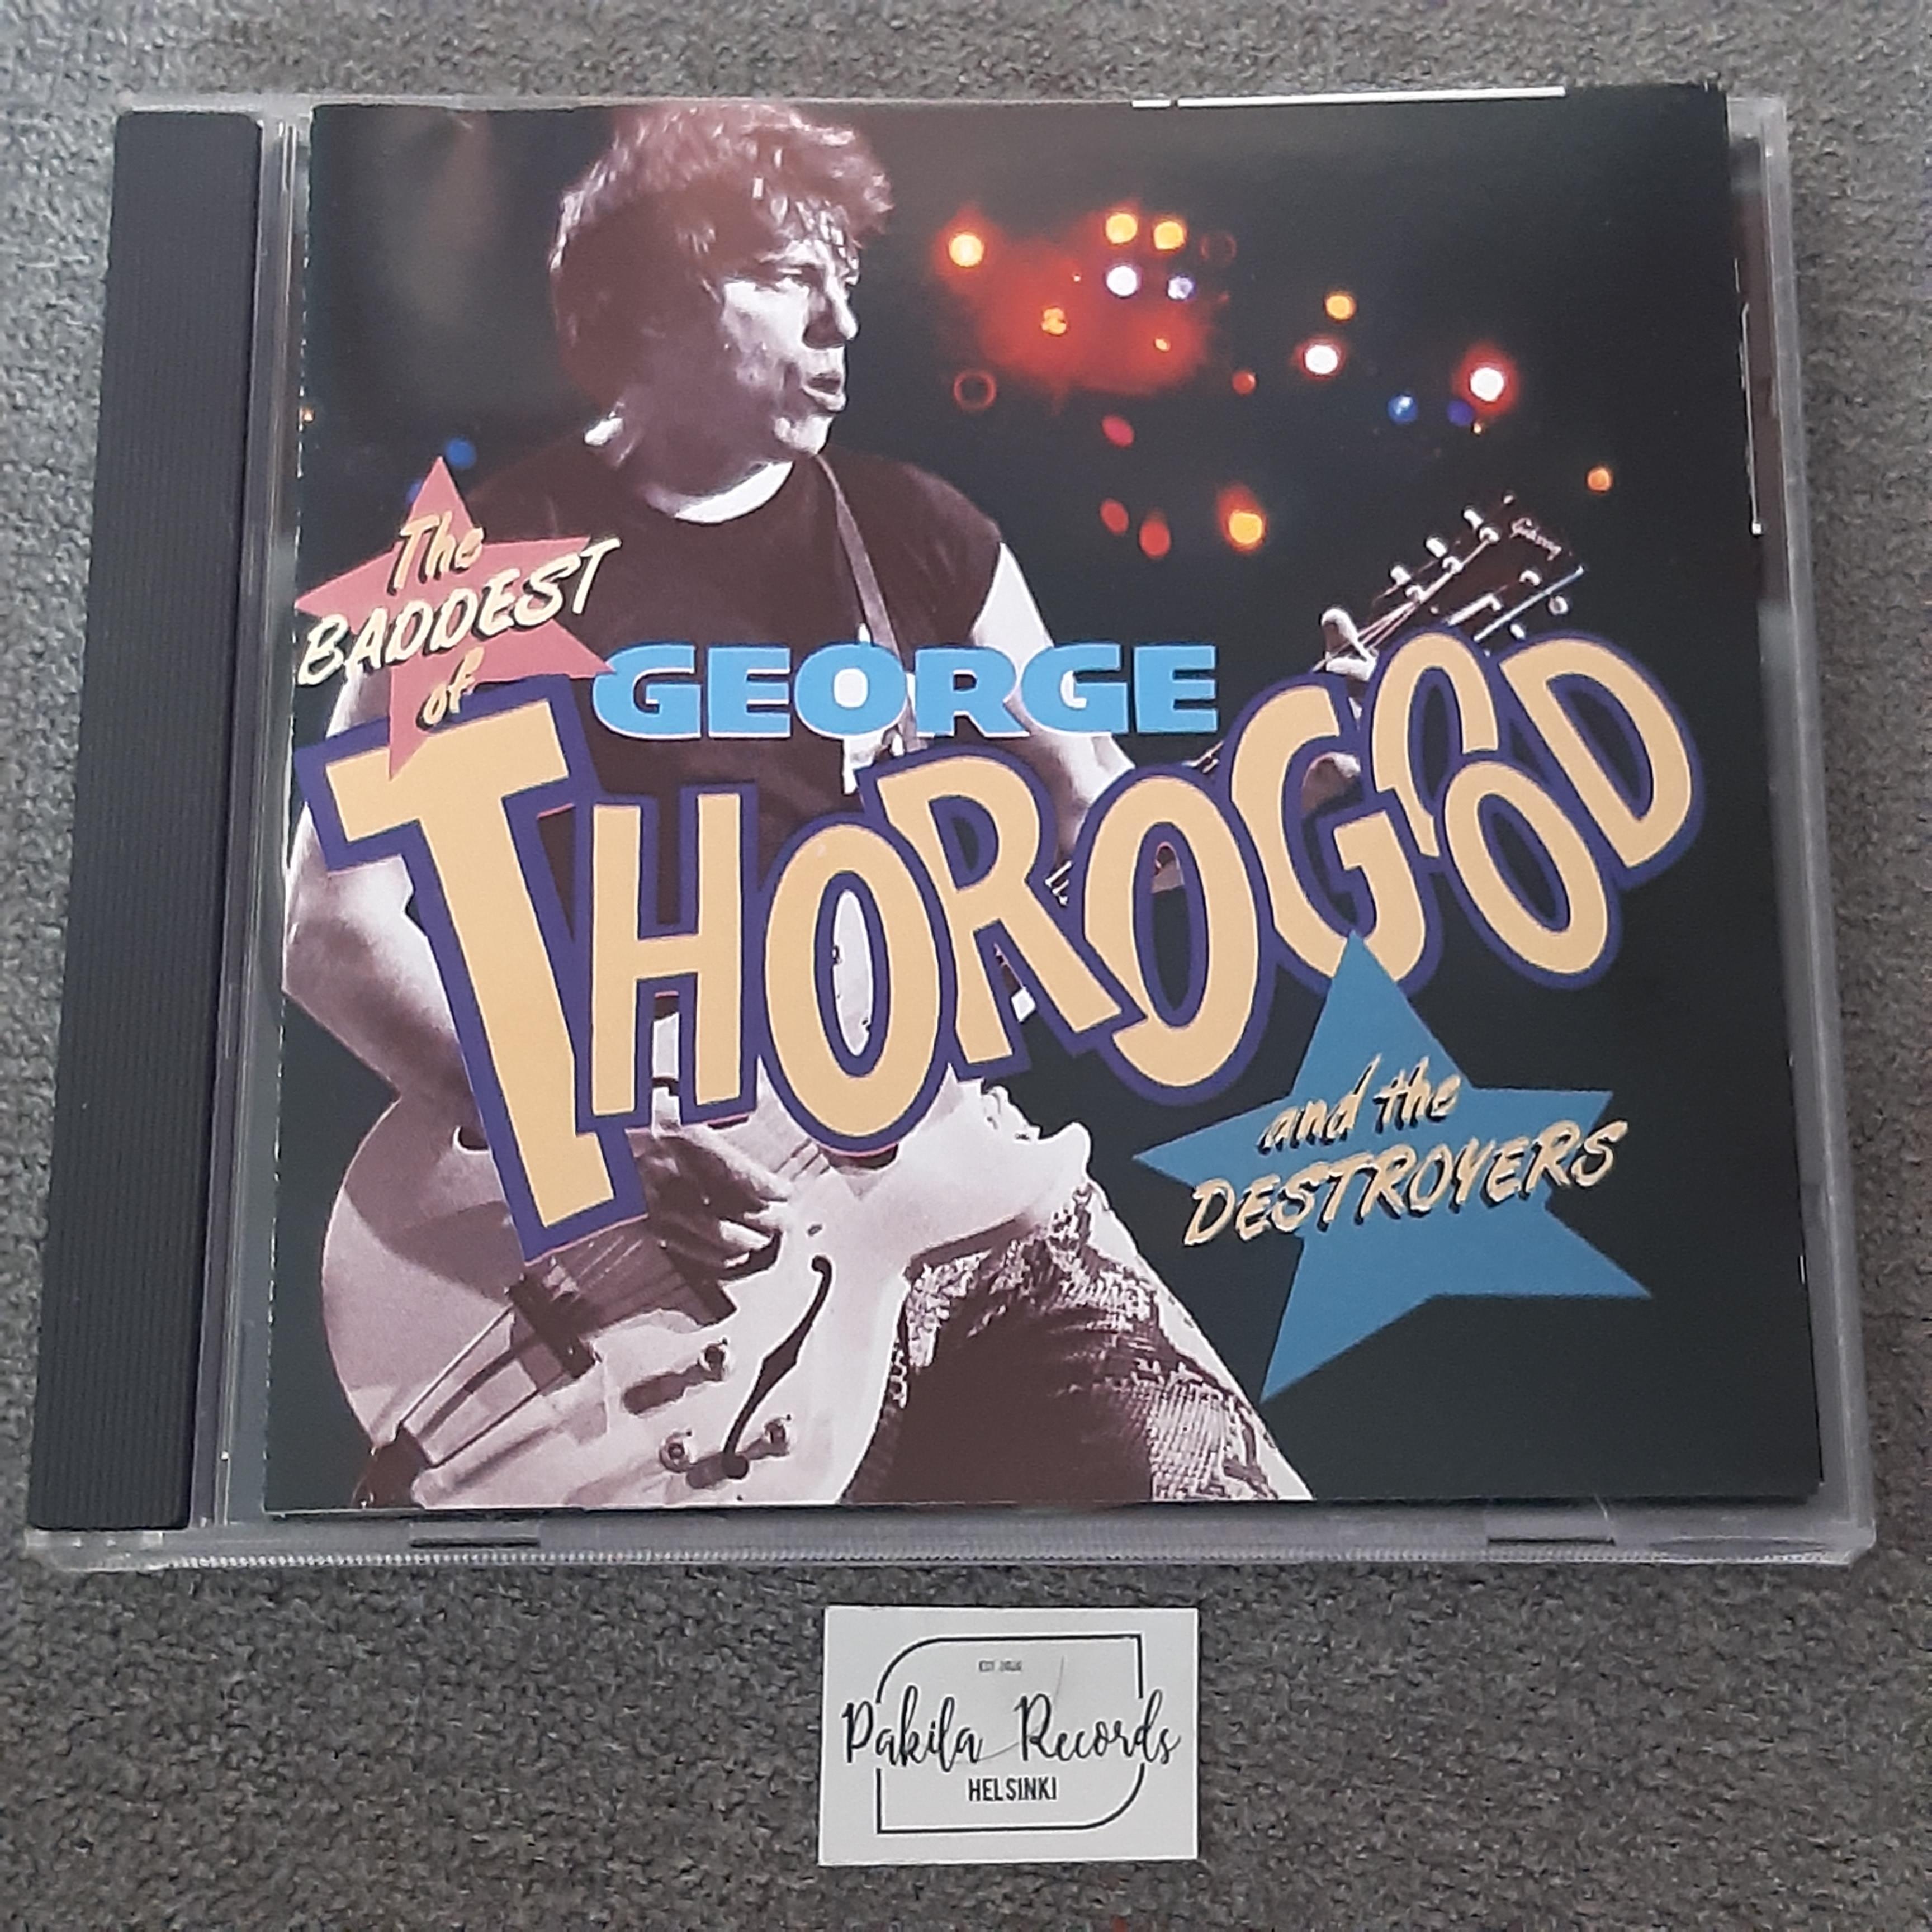 George Thorogood And The Destroyers - The Baddest Of George Thorogood... - CD (käytetty)